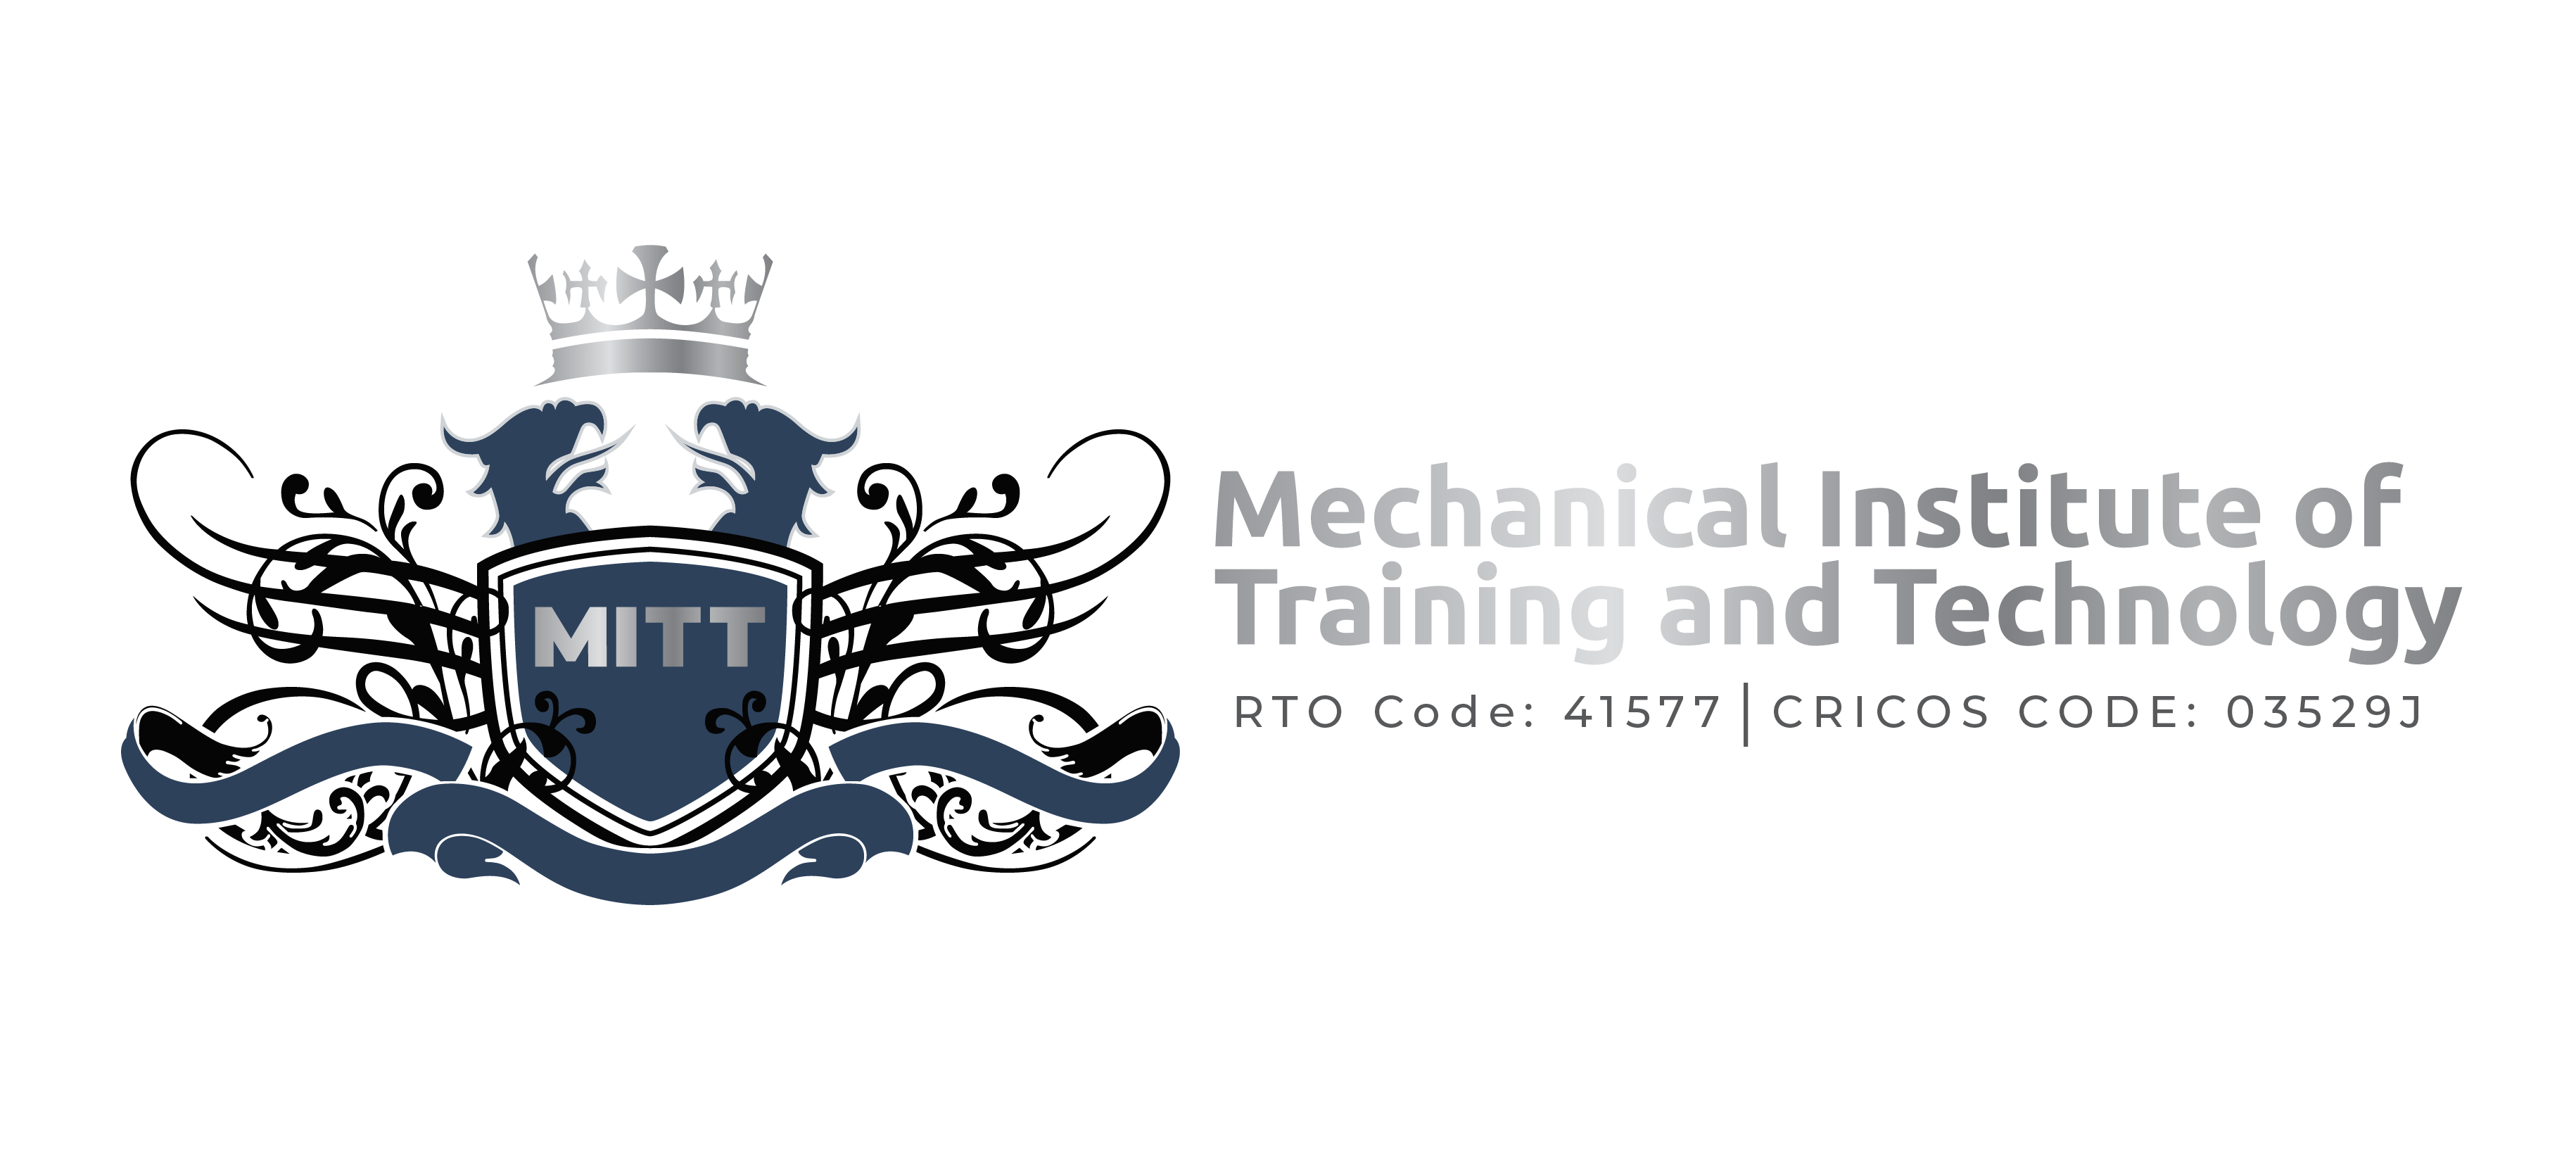 Mechanical Institute of Training and Technology